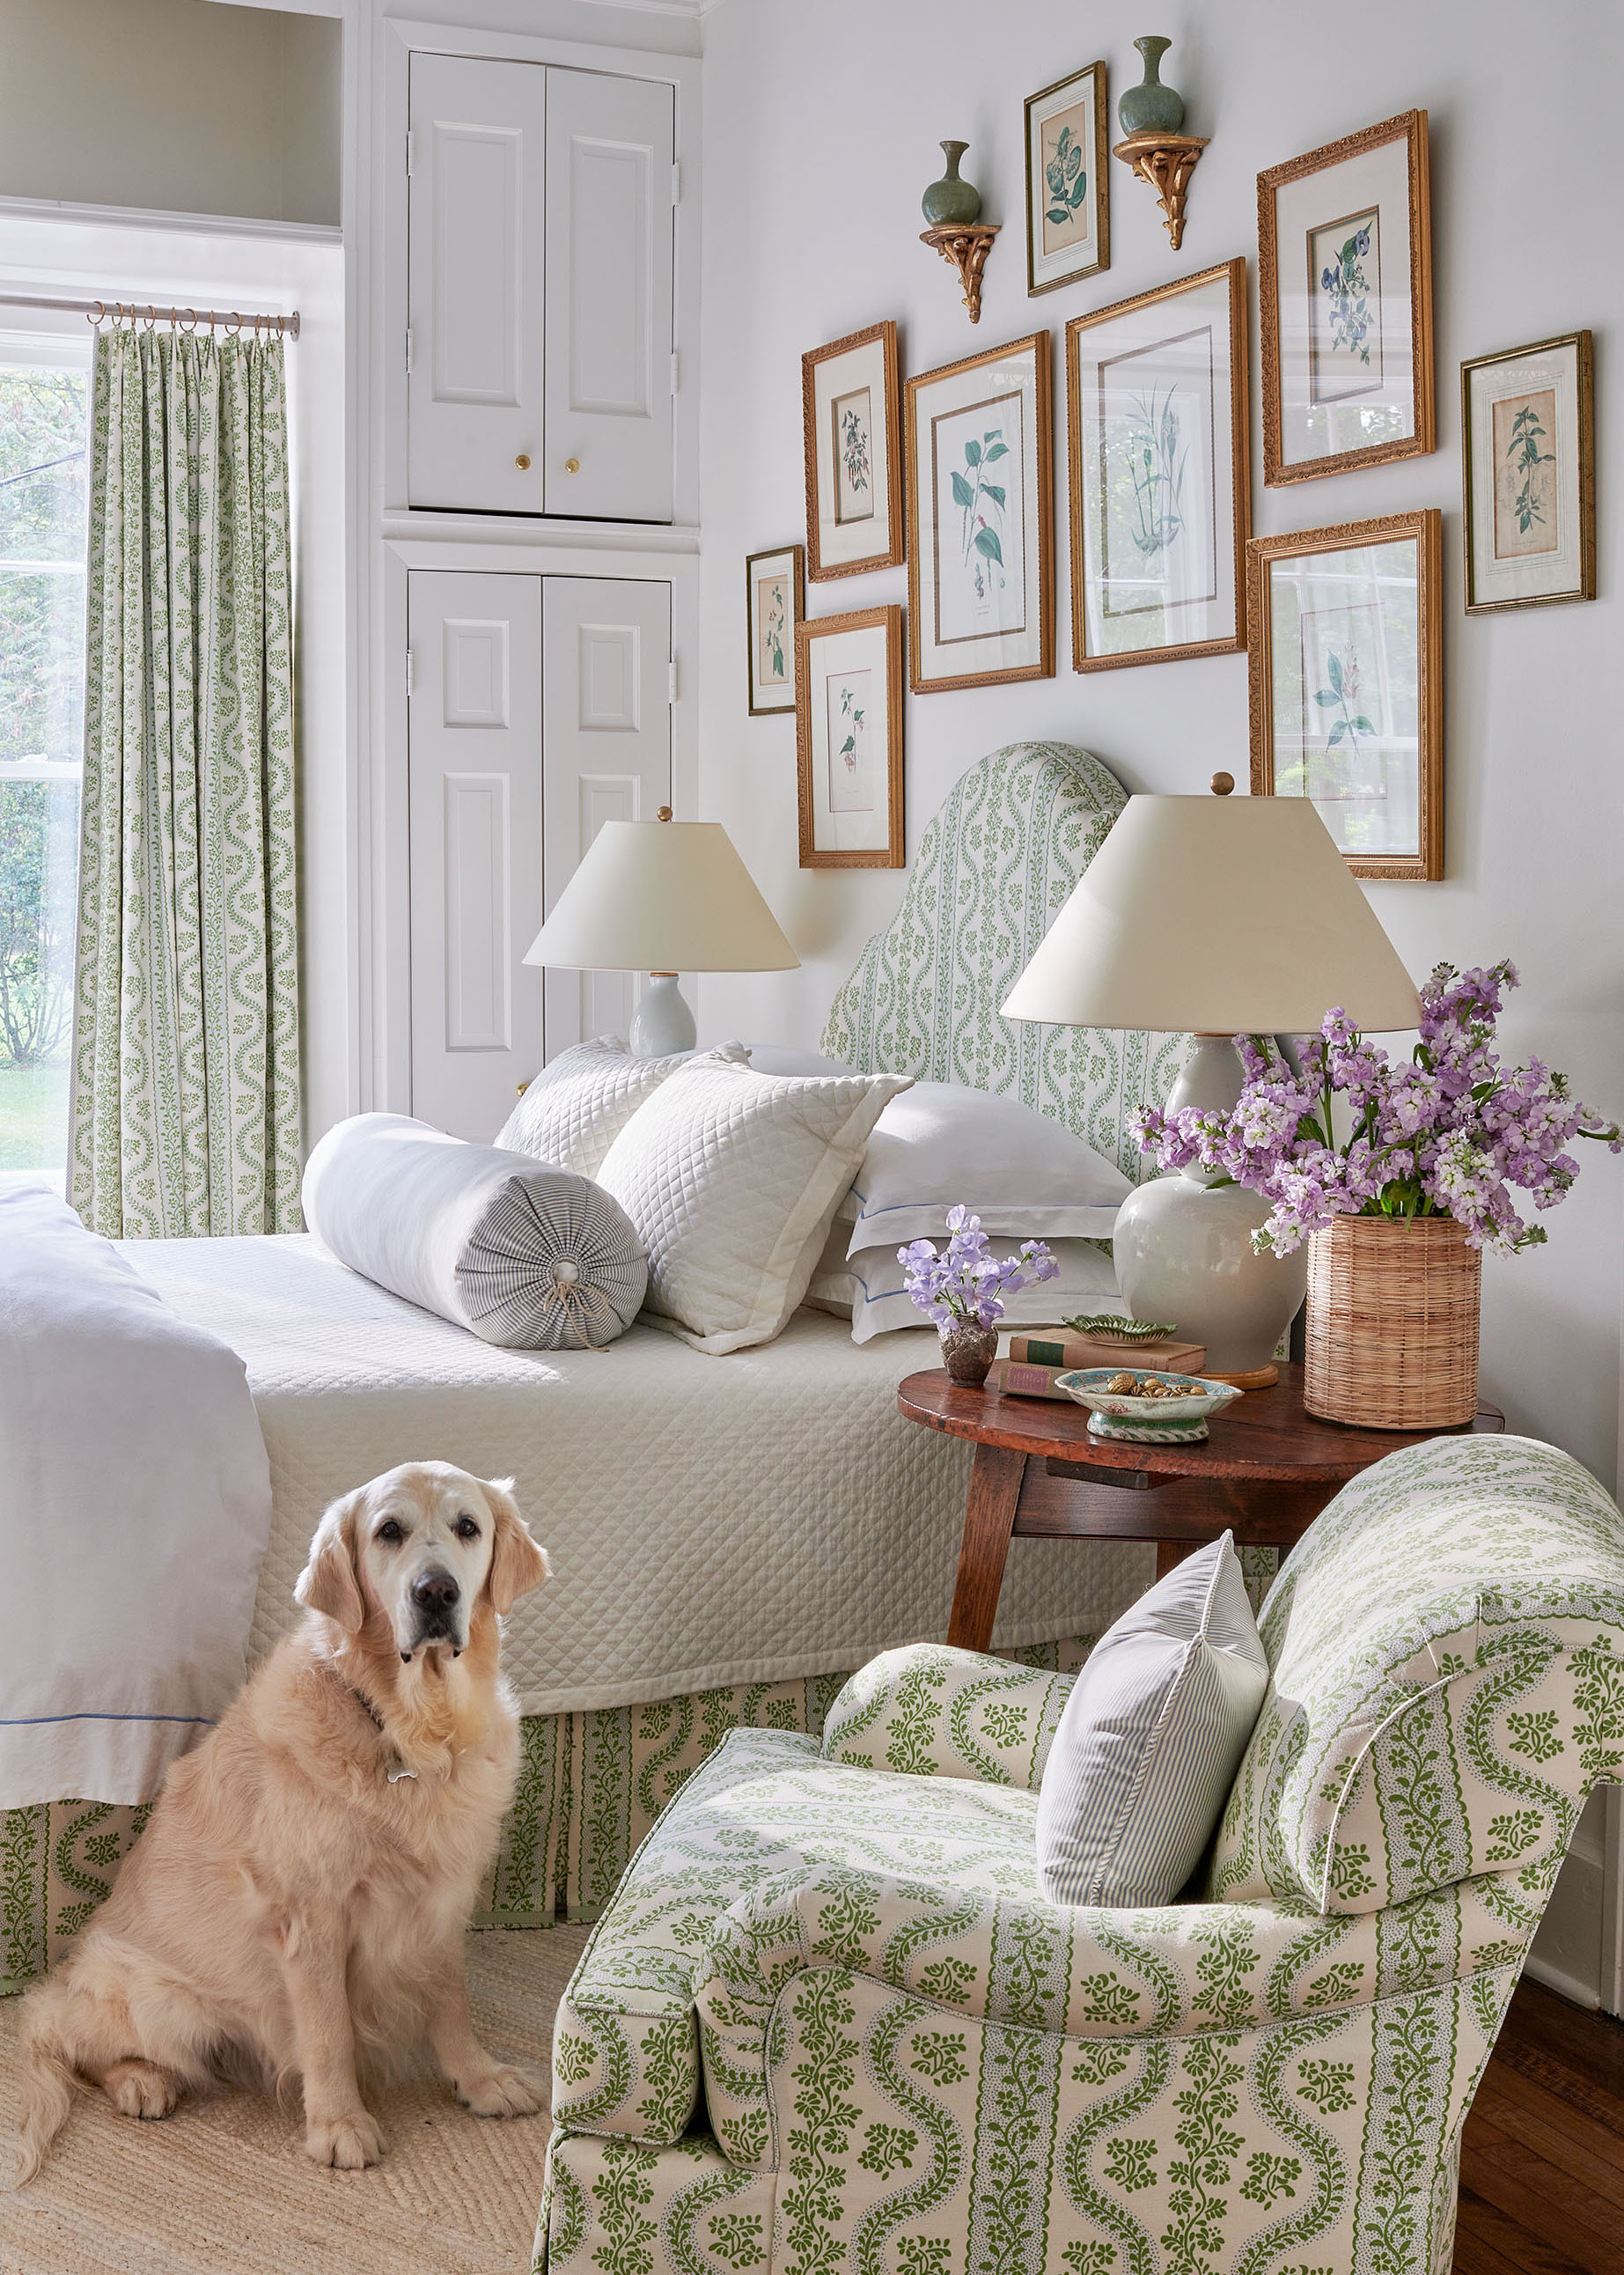 Dog sitting in front of bed  in Arkansas Home by Heather Chadduck in Veranda Magazine by Alison Gootee photography